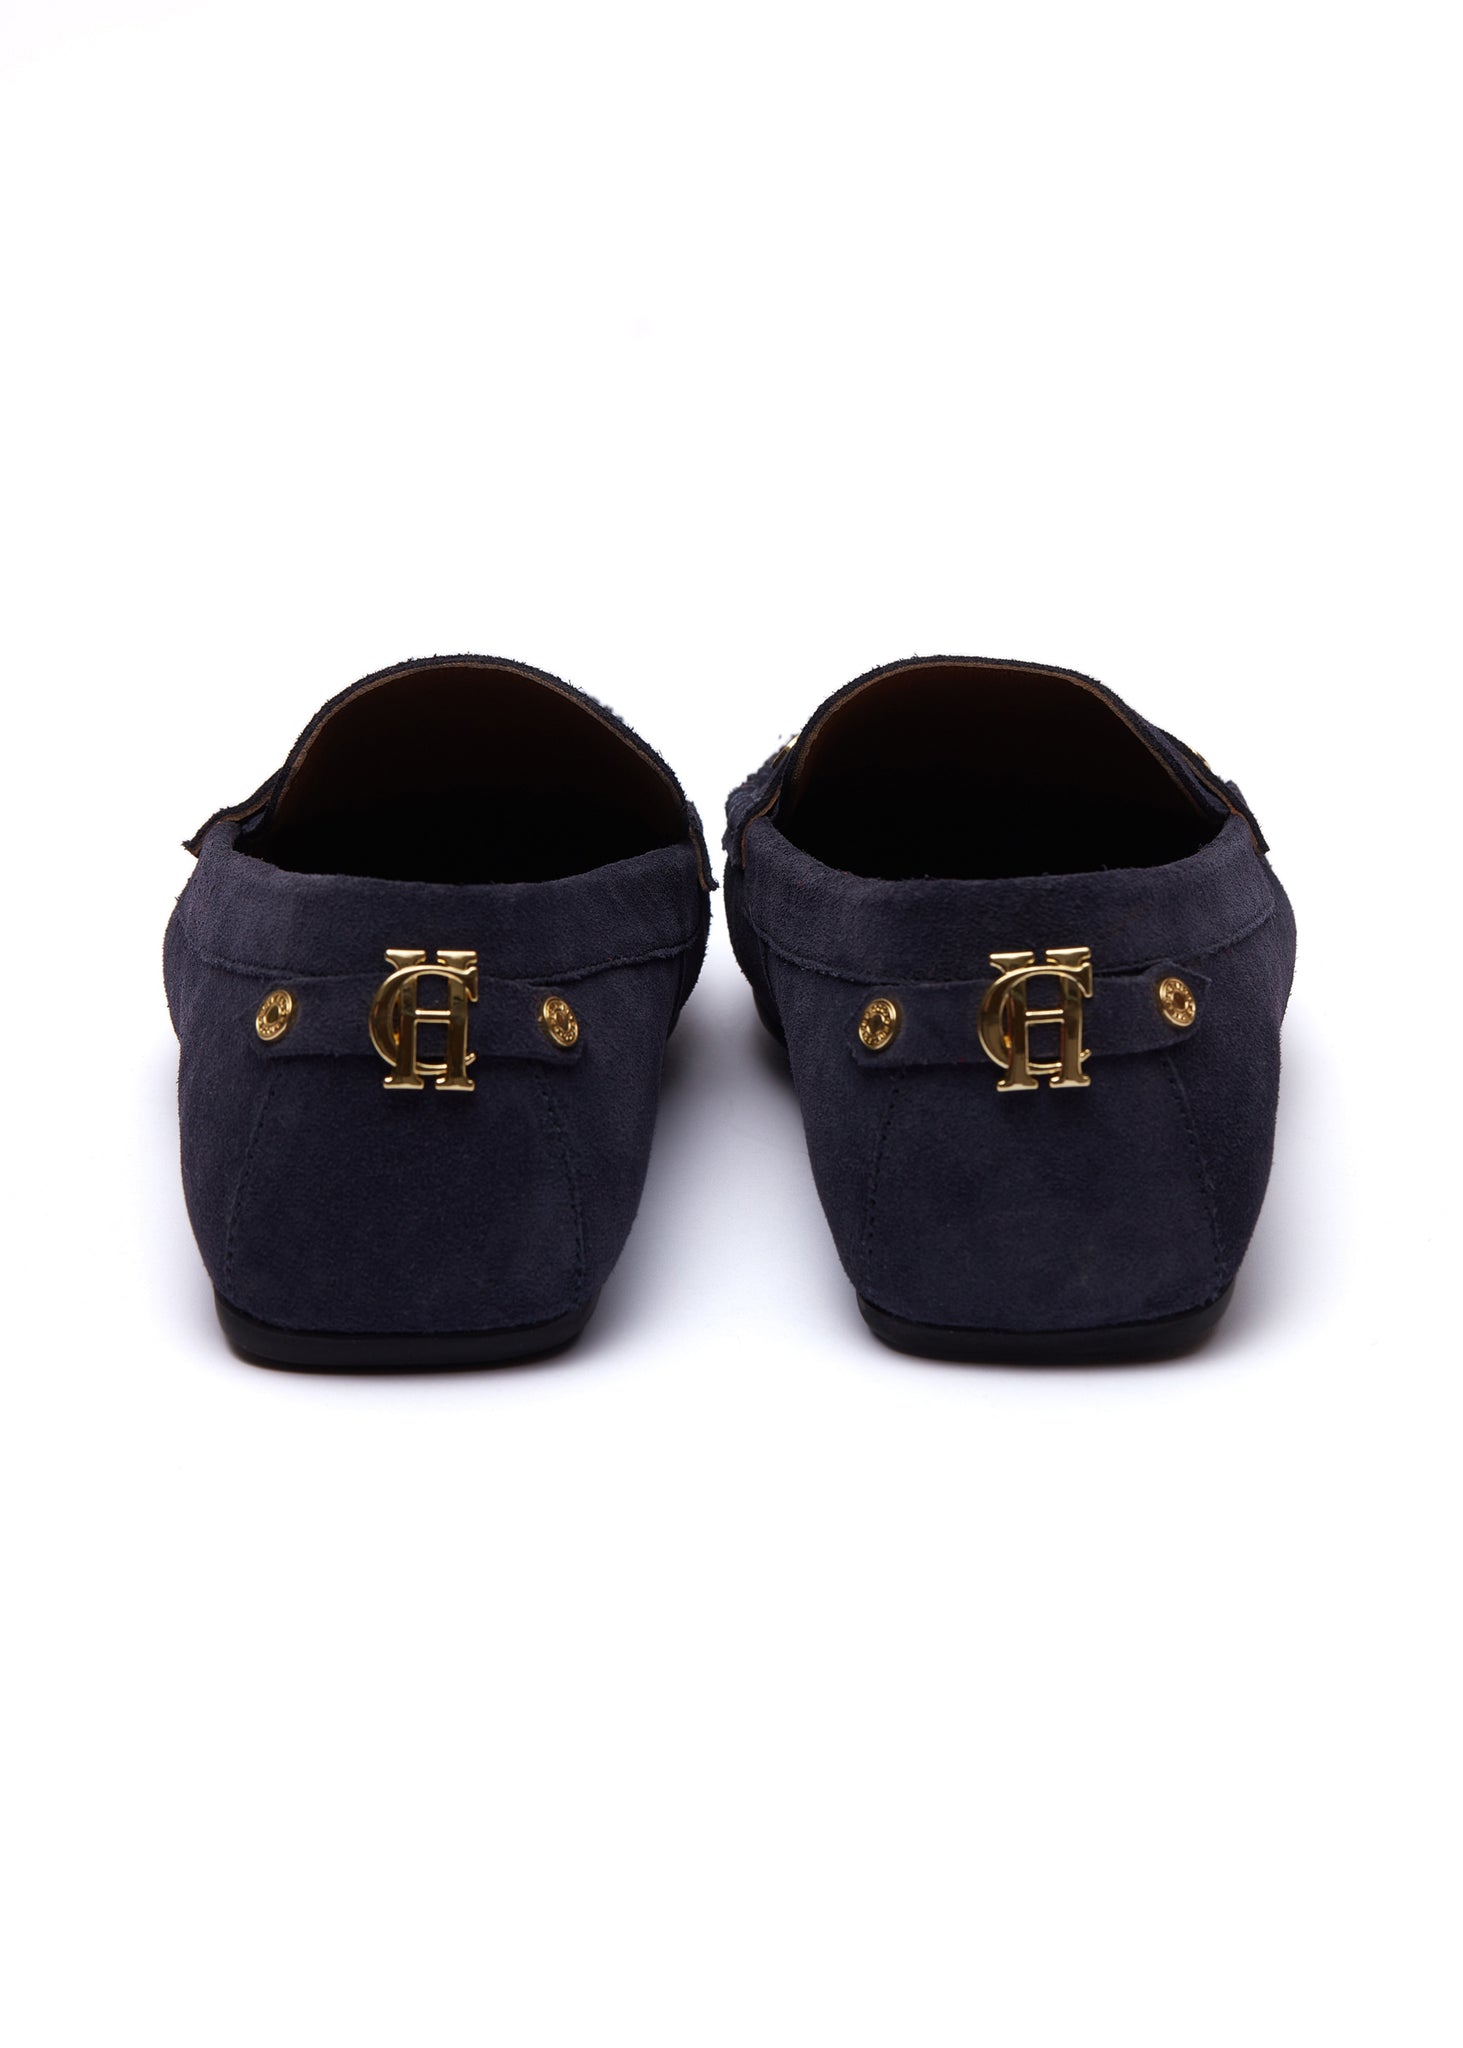 back of navy suede loafers with a leather sole and gold hardware